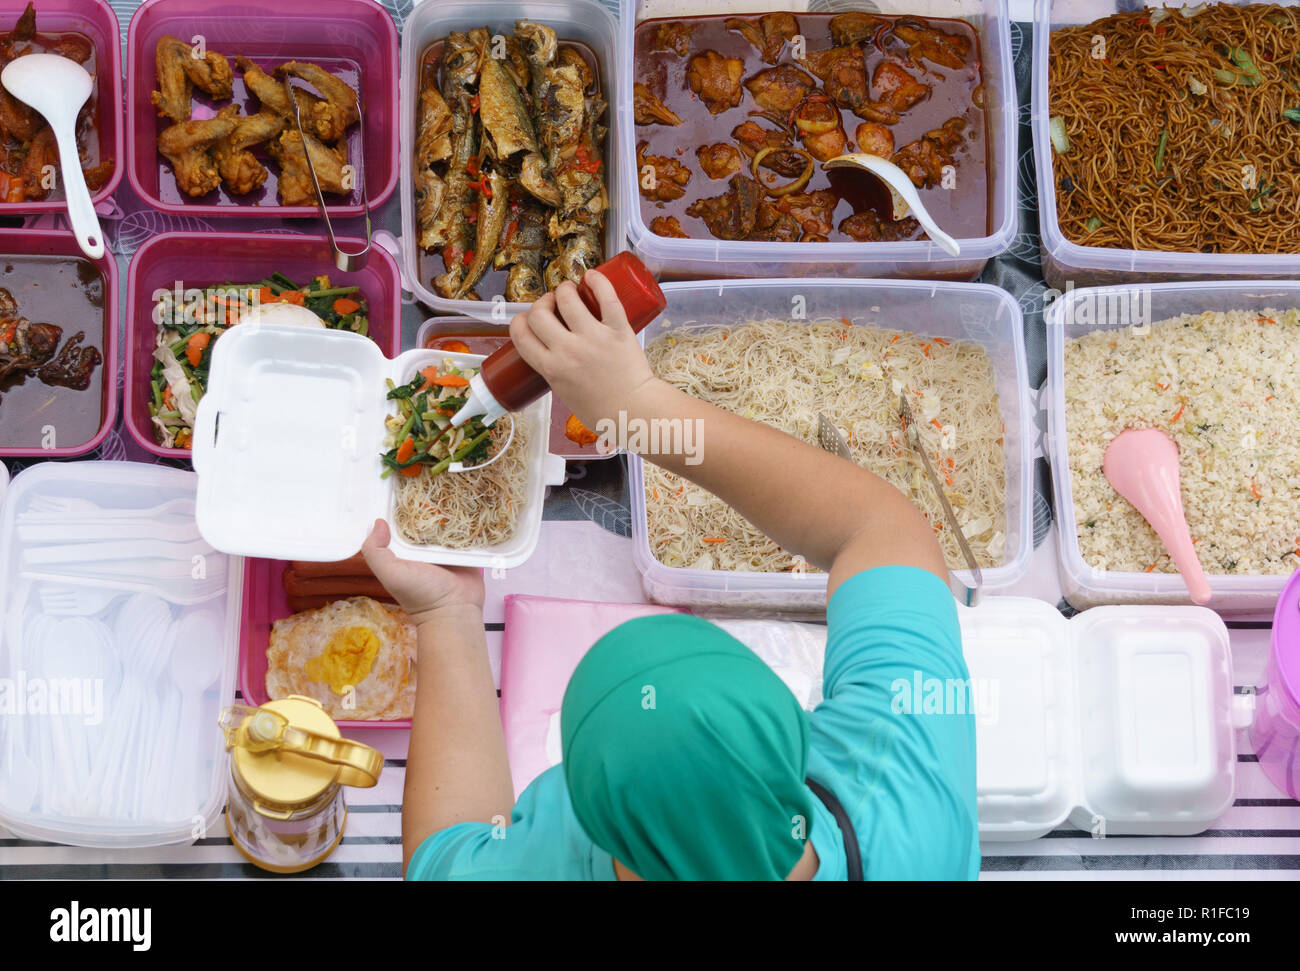 Variety of delicious Malaysian home cooked dishes sold at street market stall in Kota Kinabalu Sabah  from top angle view. Stock Photo